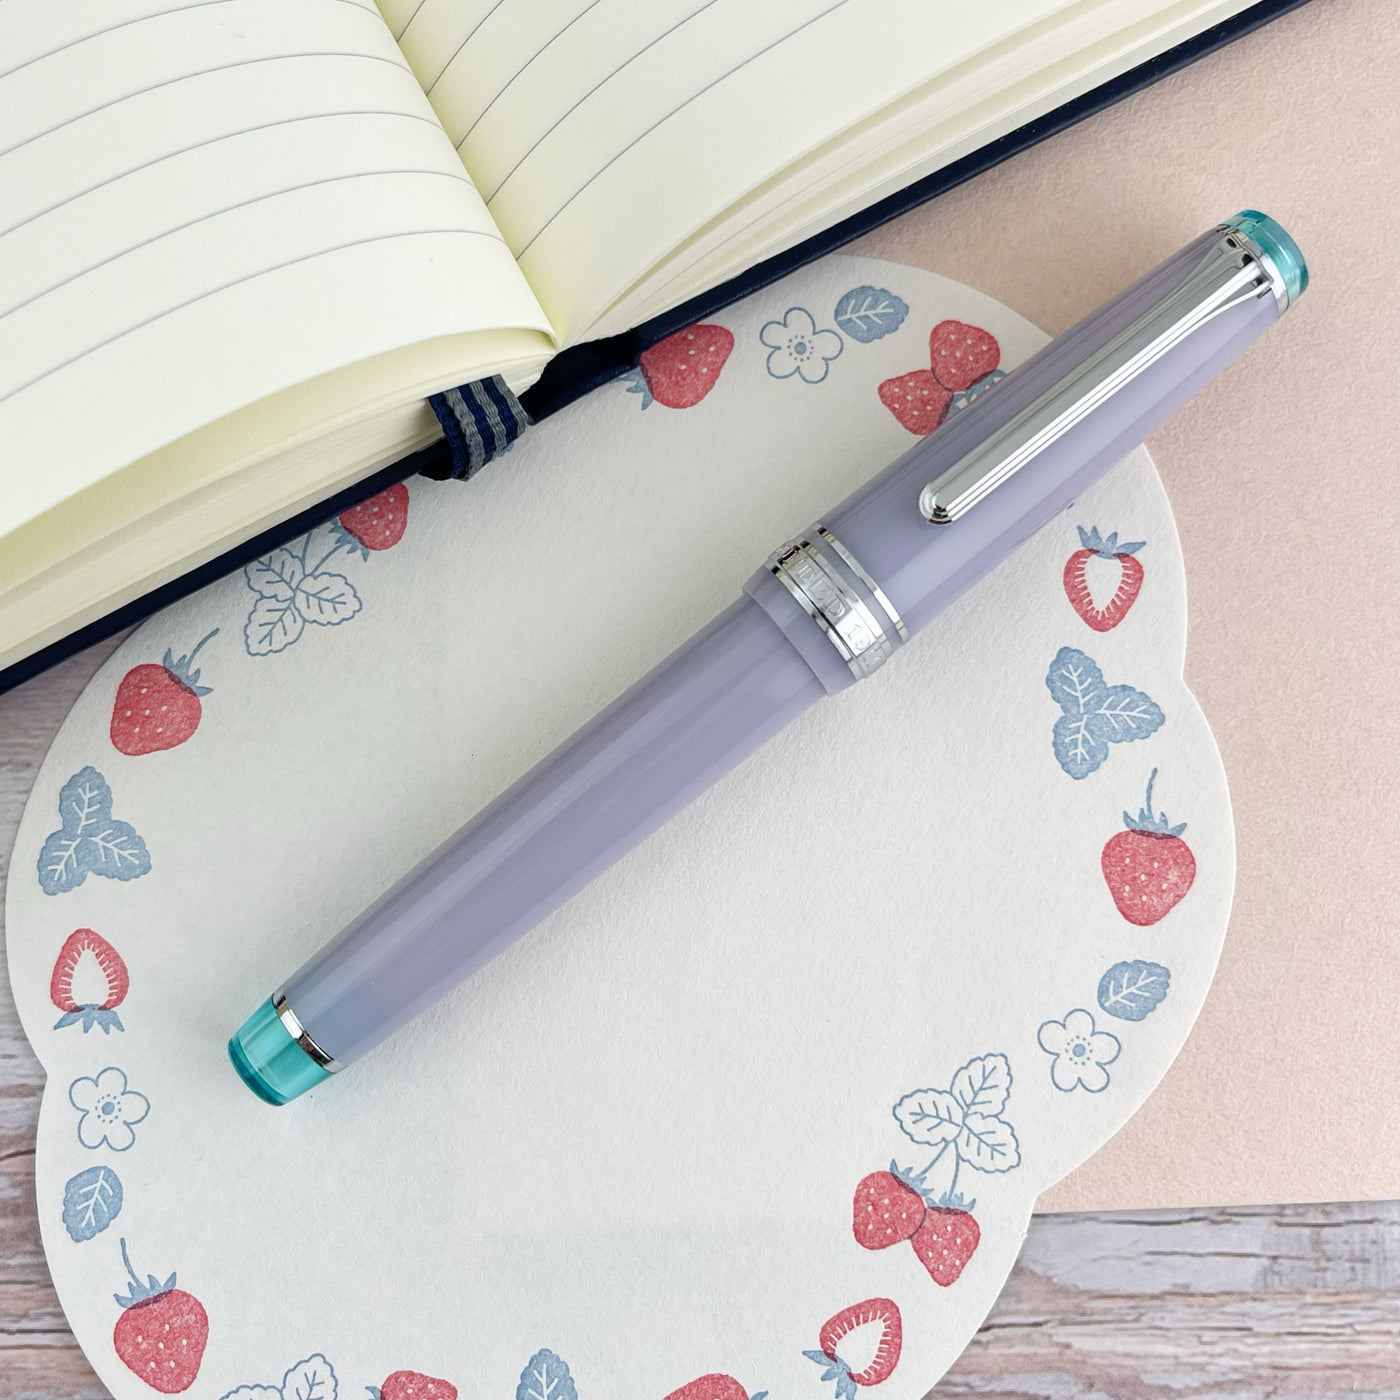 Sailor Pro Gear Slim Manyo Fountain Pen - Willow (Special Edition)